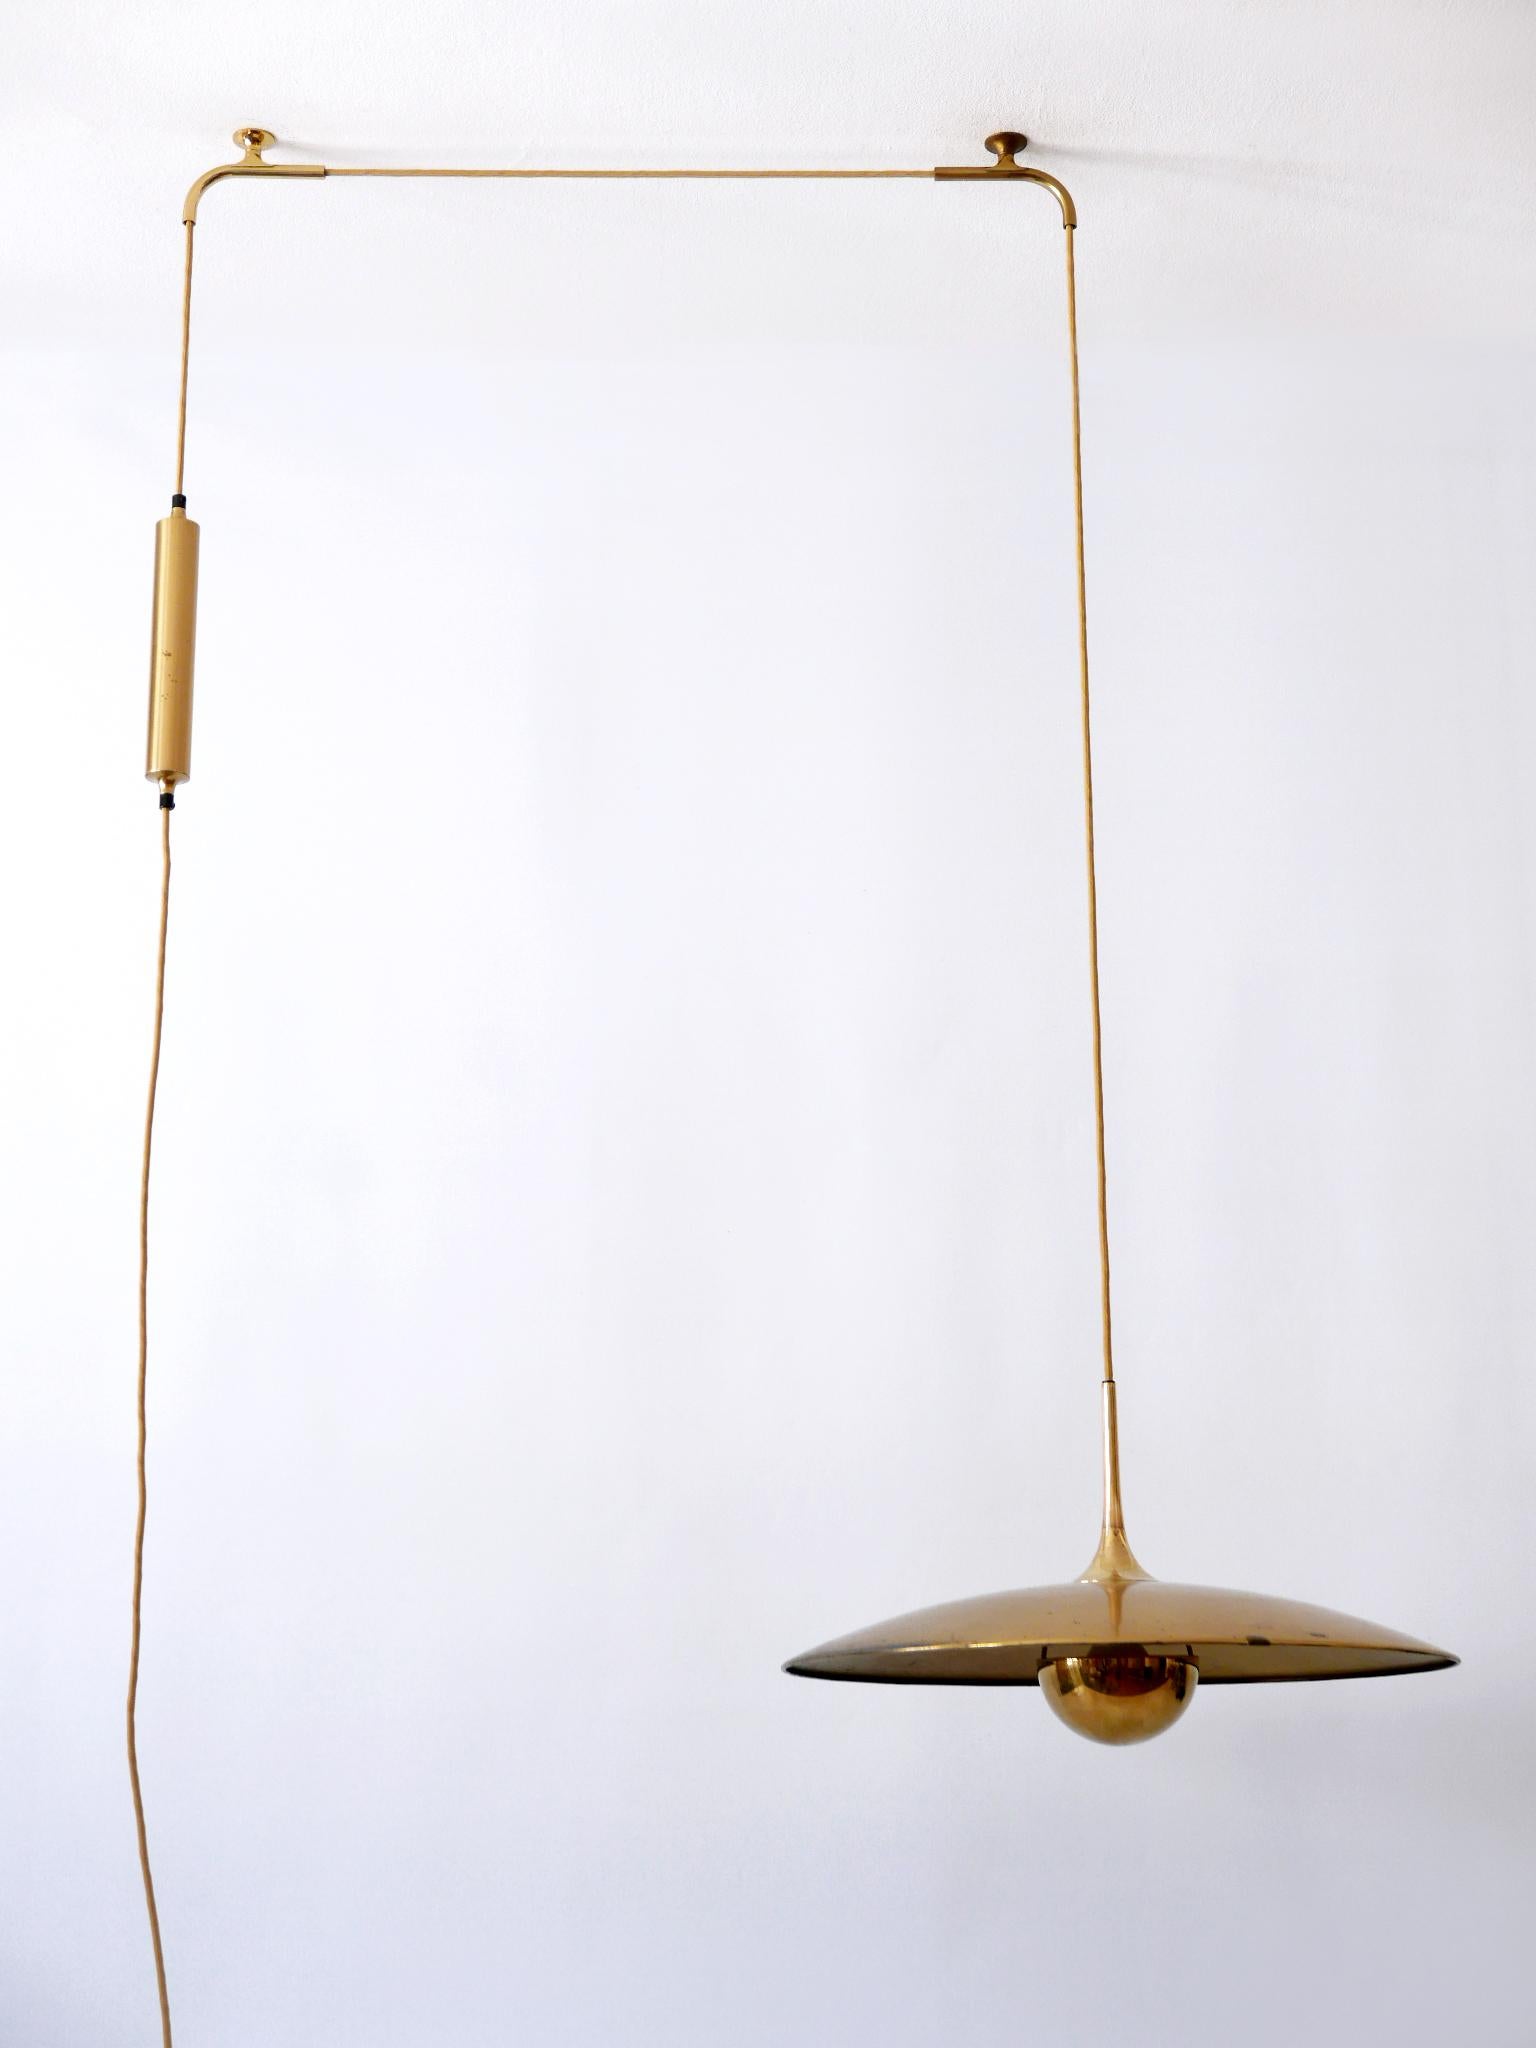 Polished Rare Early Brass Counterweight Pendant Lamp 'Onos 55' by Florian Schulz 1960s